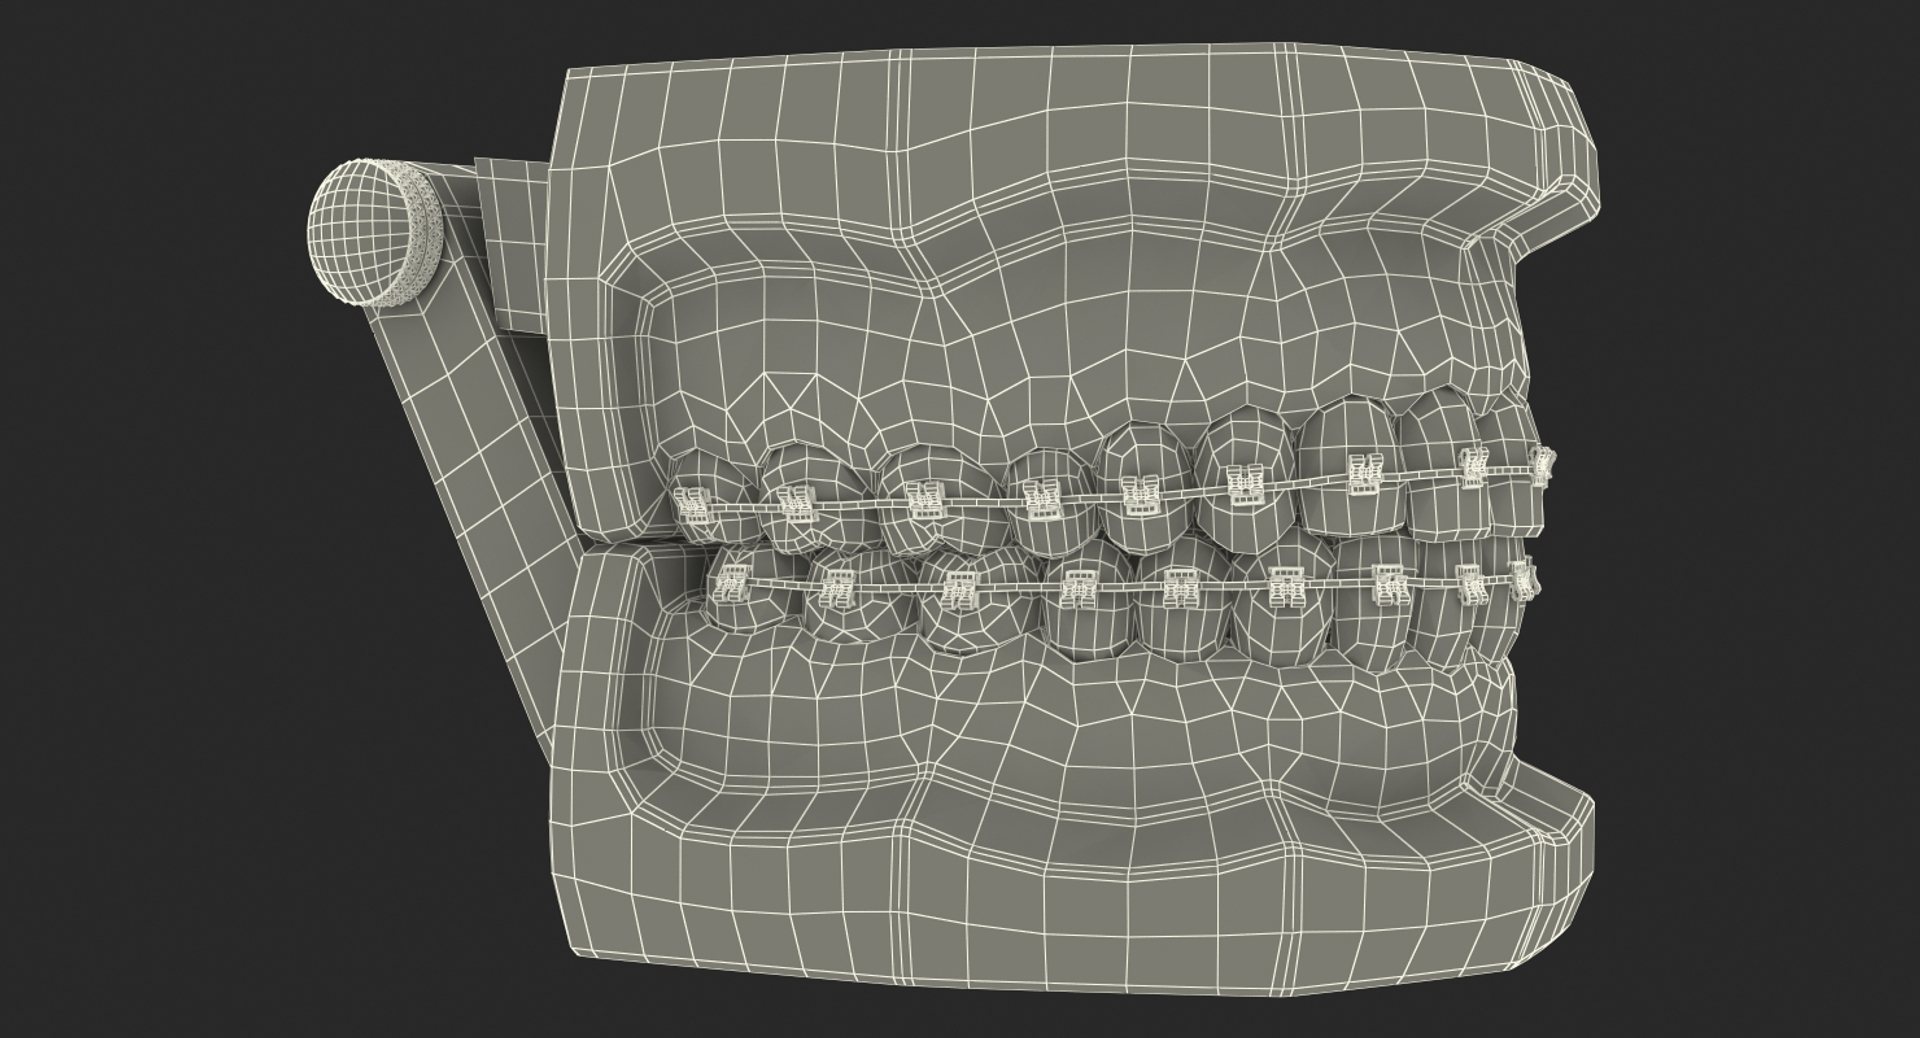 Teeth Mold - 3D Model by dcbittorf